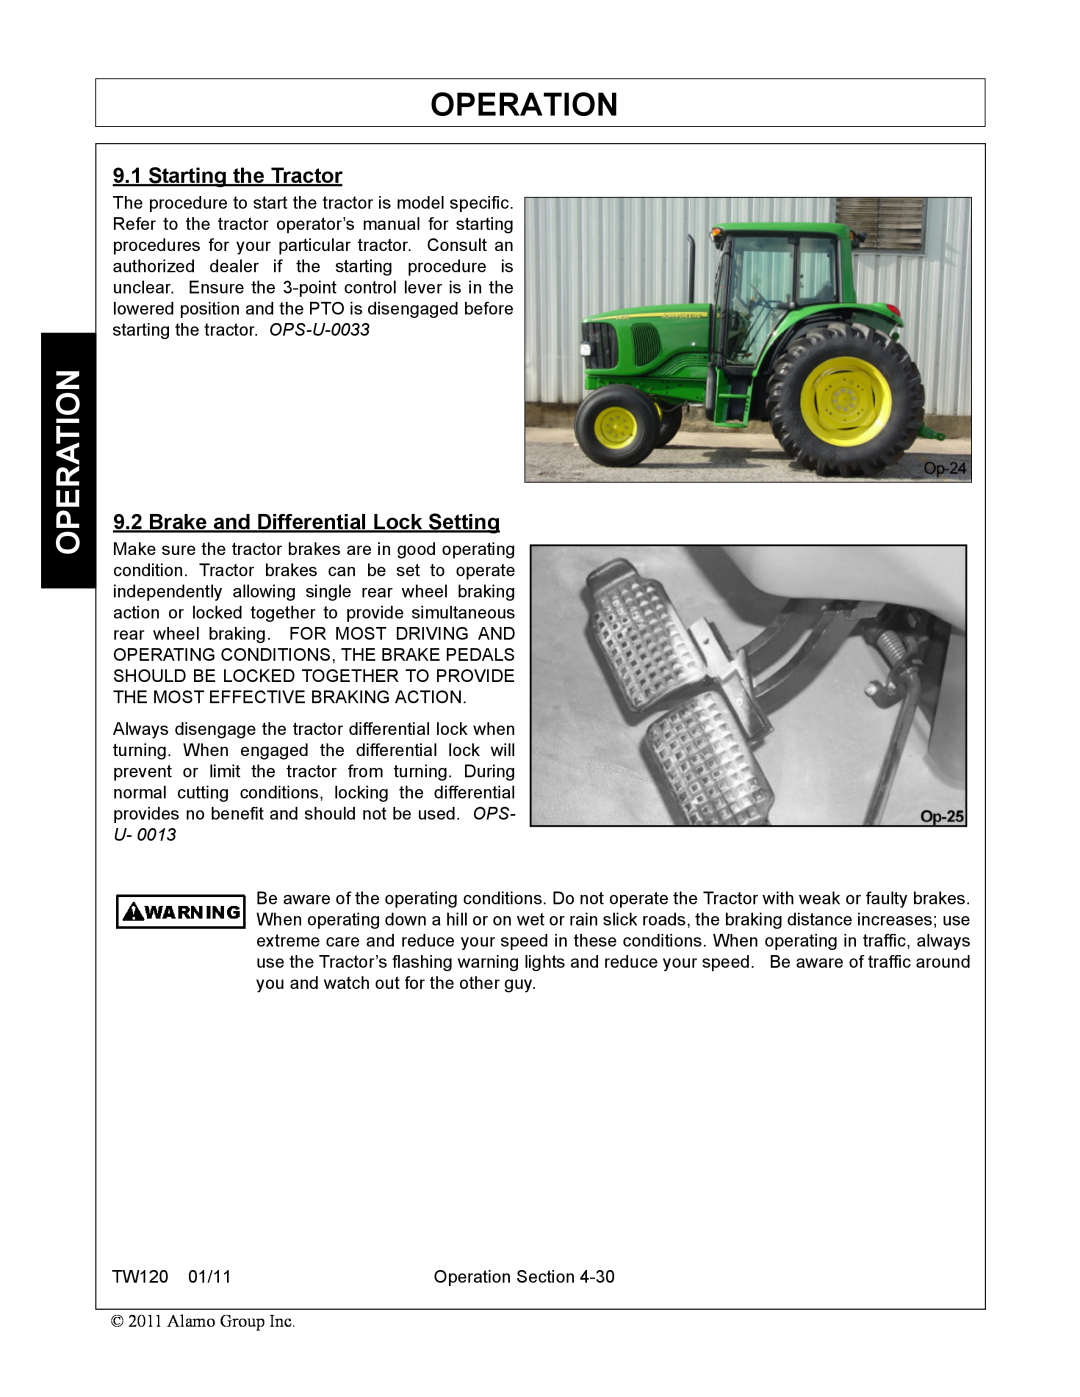 Blue Rhino FC-0024, FC-0025 manual Operation, Starting the Tractor, Brake and Differential Lock Setting 